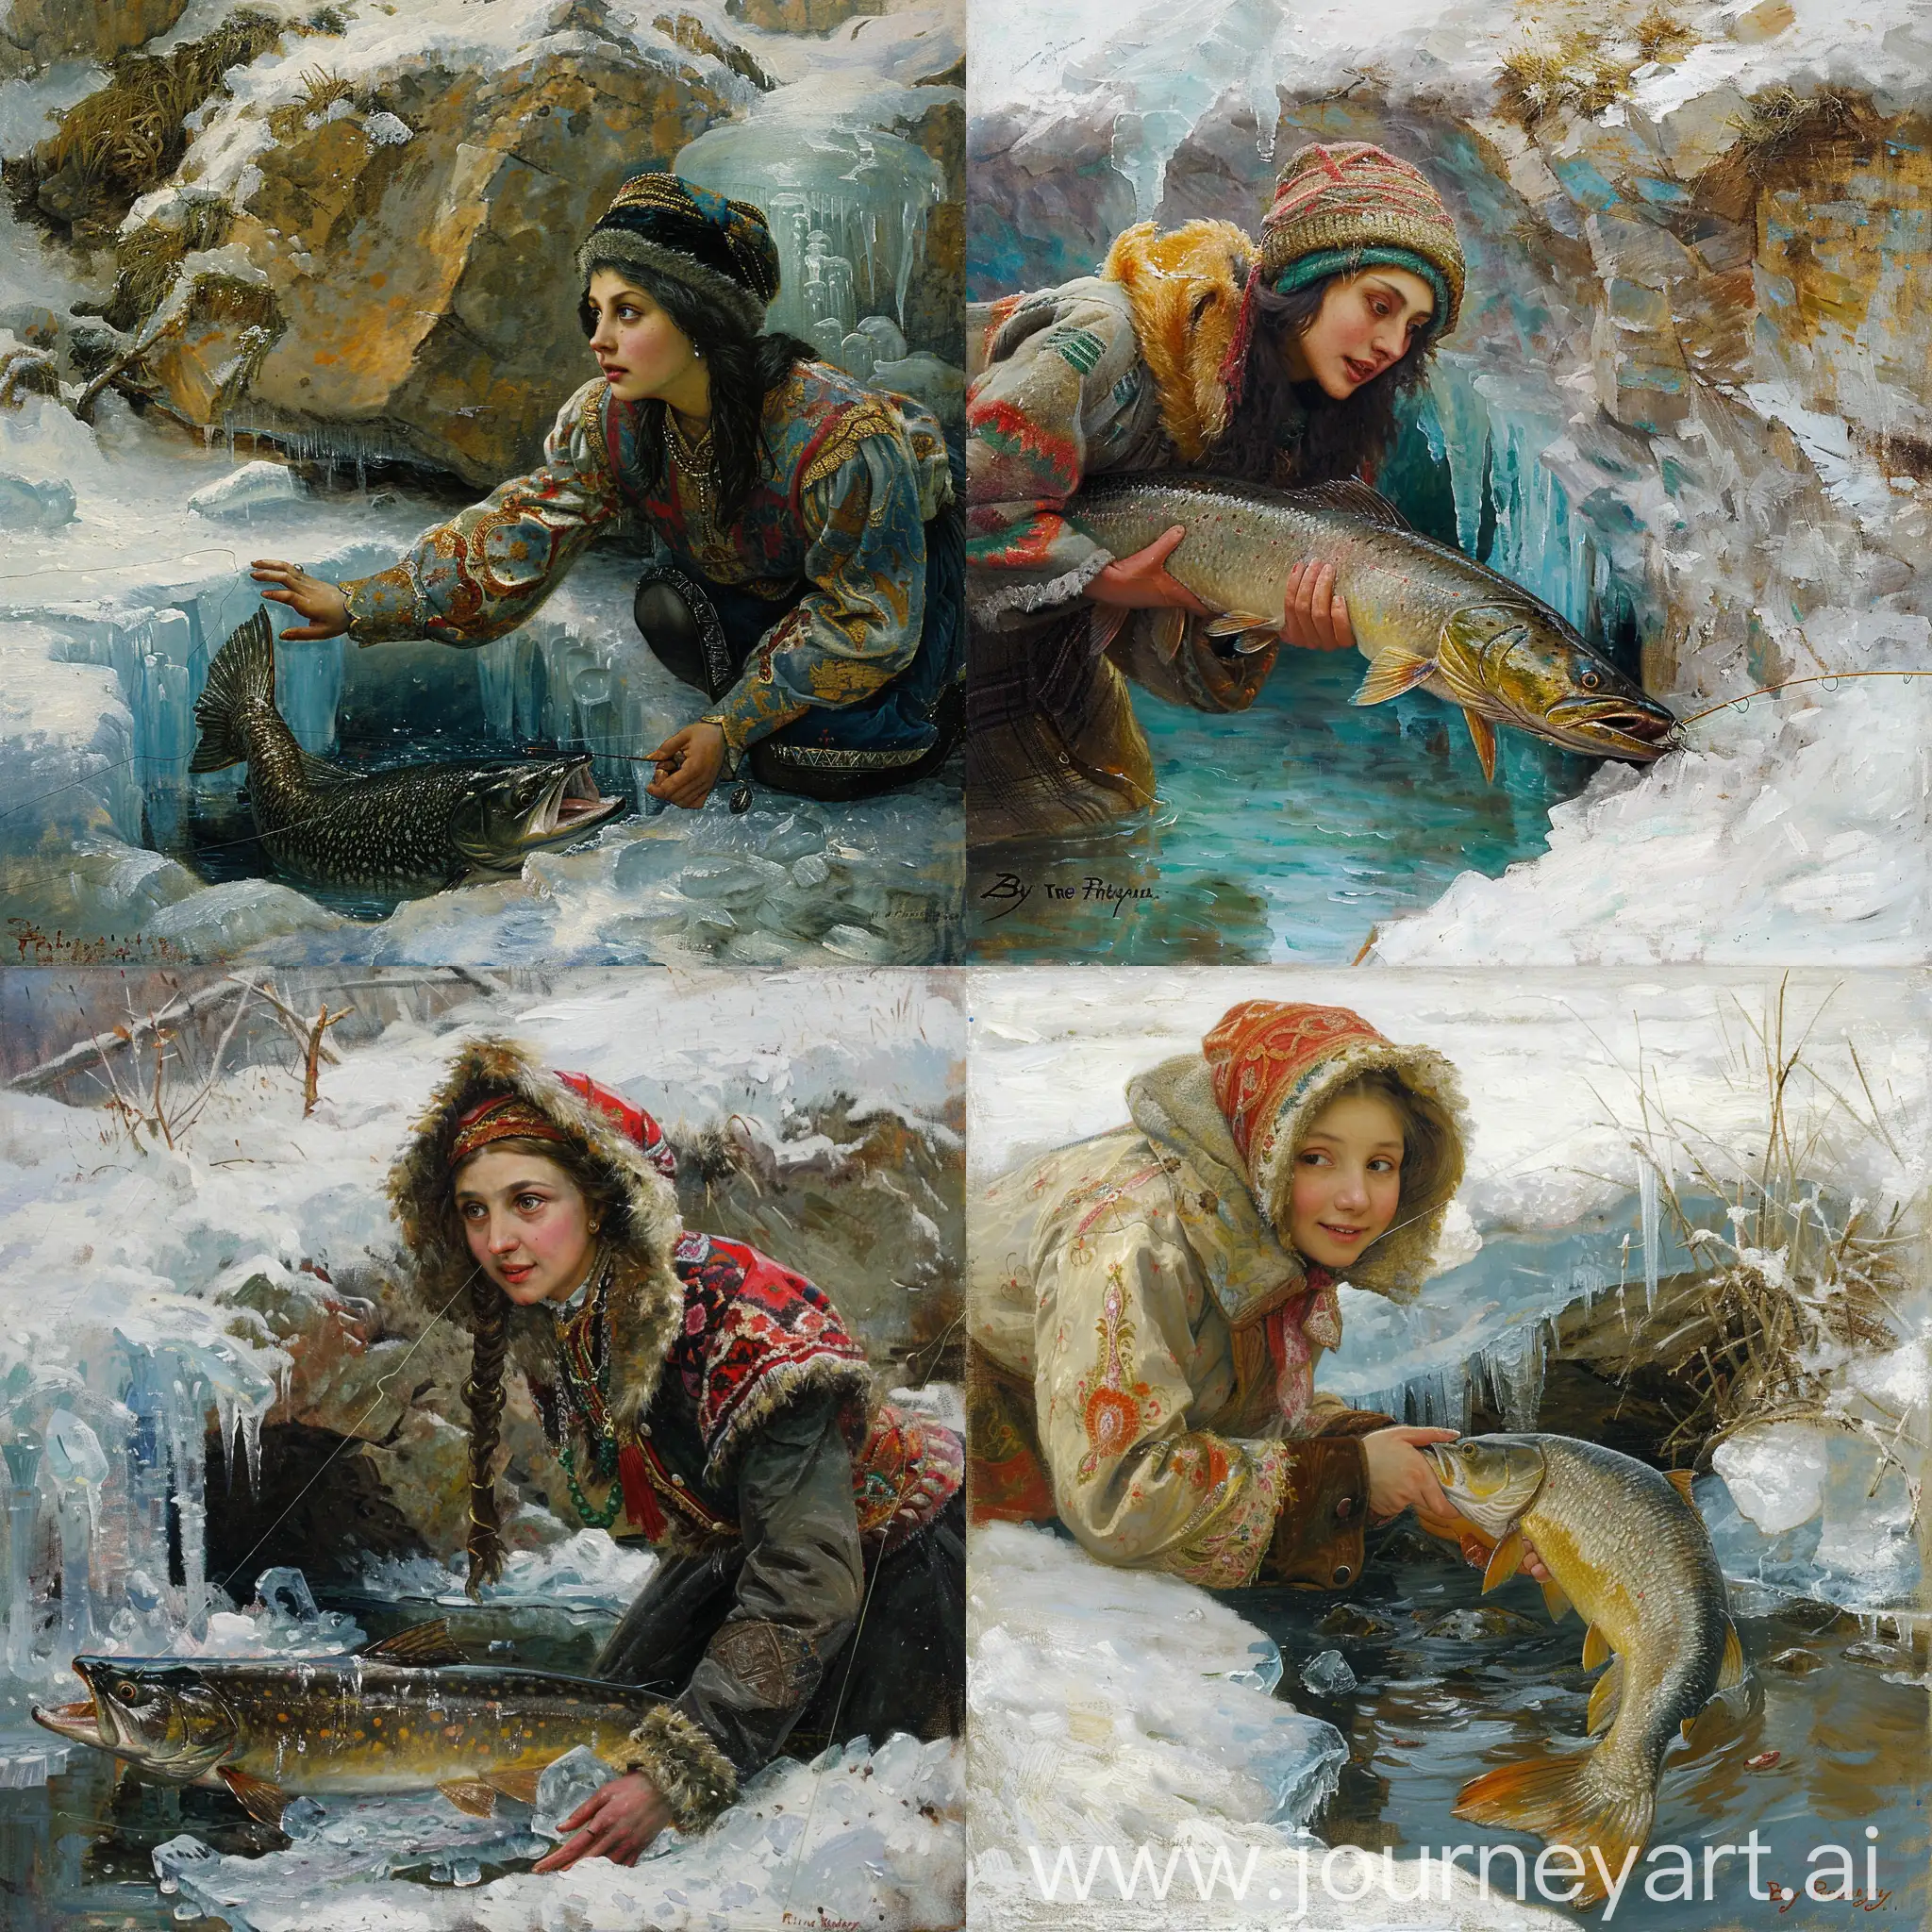 Emelya-Catching-a-Pike-by-the-Ice-Hole-Realistic-Depiction-Inspired-by-Ilya-Repins-Style